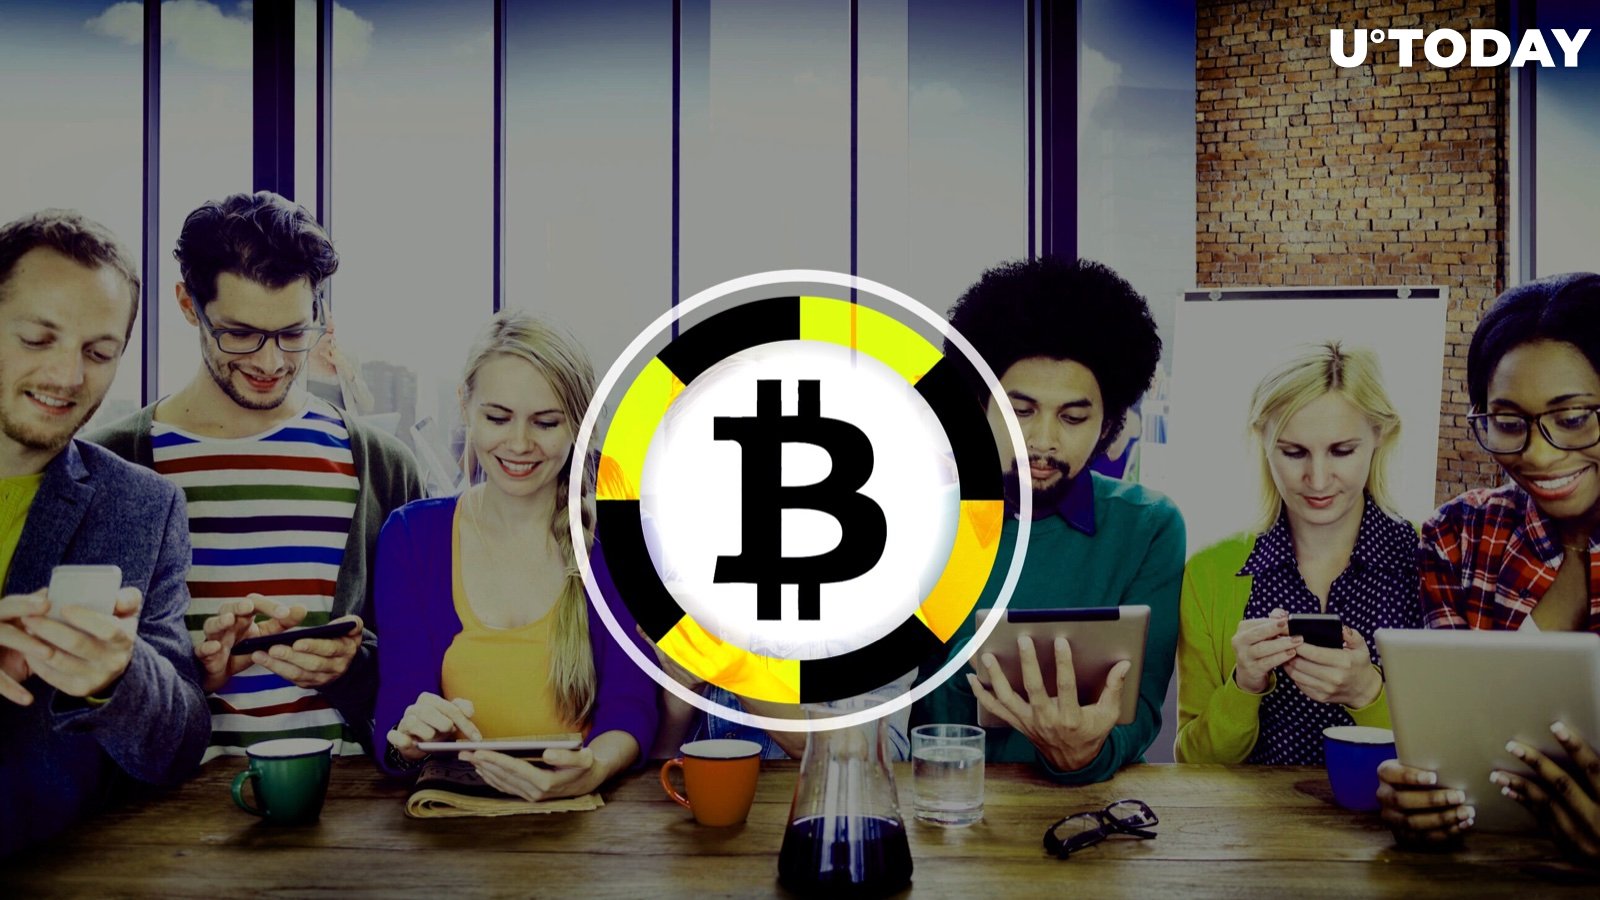 Forbes: Bitcoin Preferred by Millennials of 18-34 over Regular Assets, Poll States